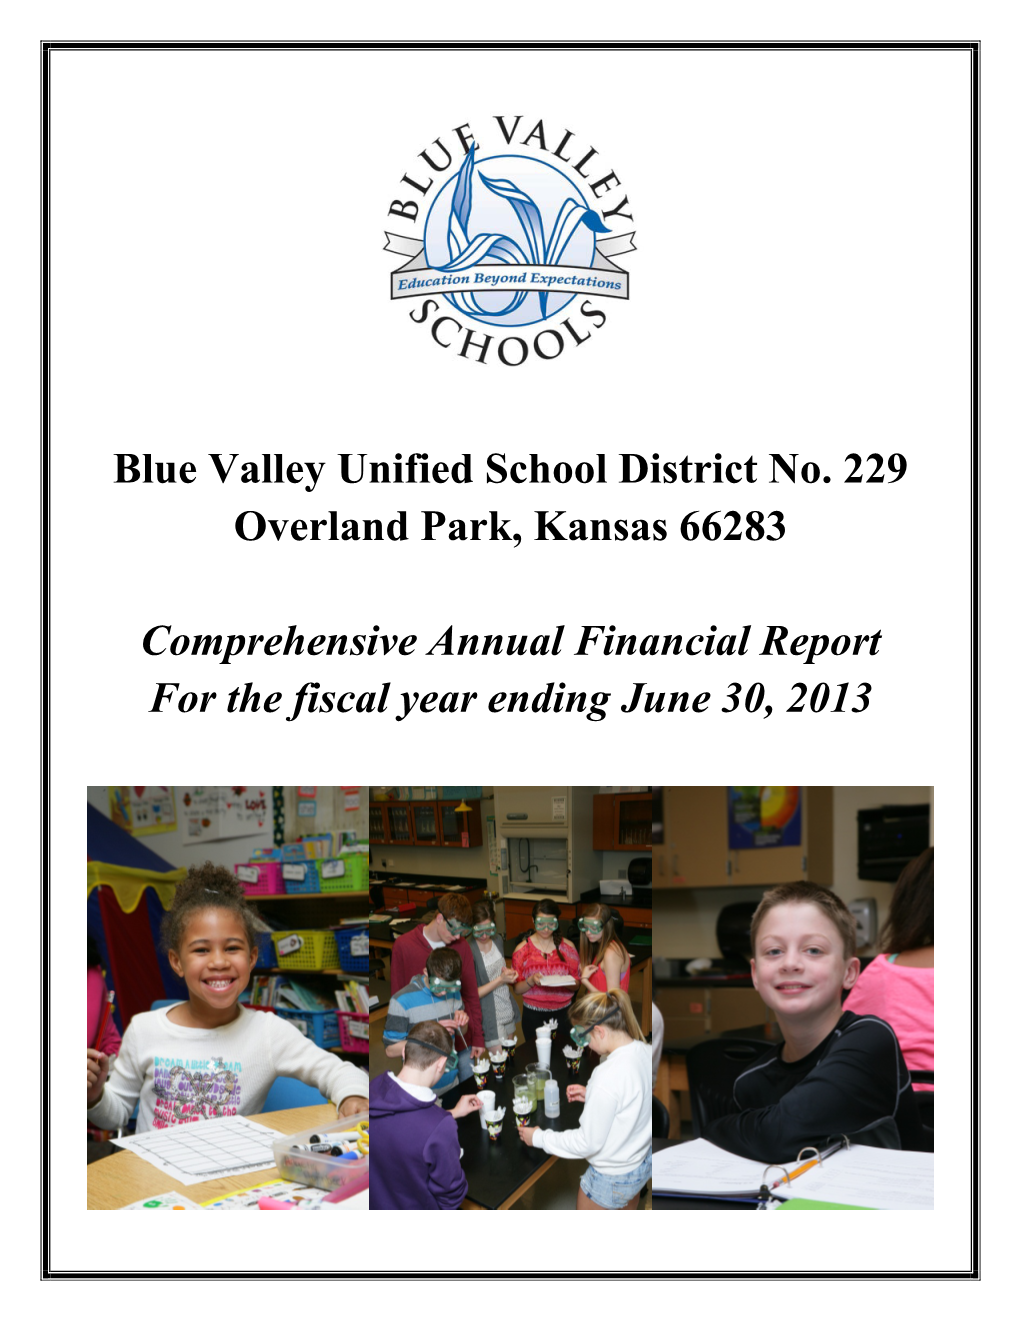 Blue Valley Unified School District No. 229 Overland Park, Kansas 66283